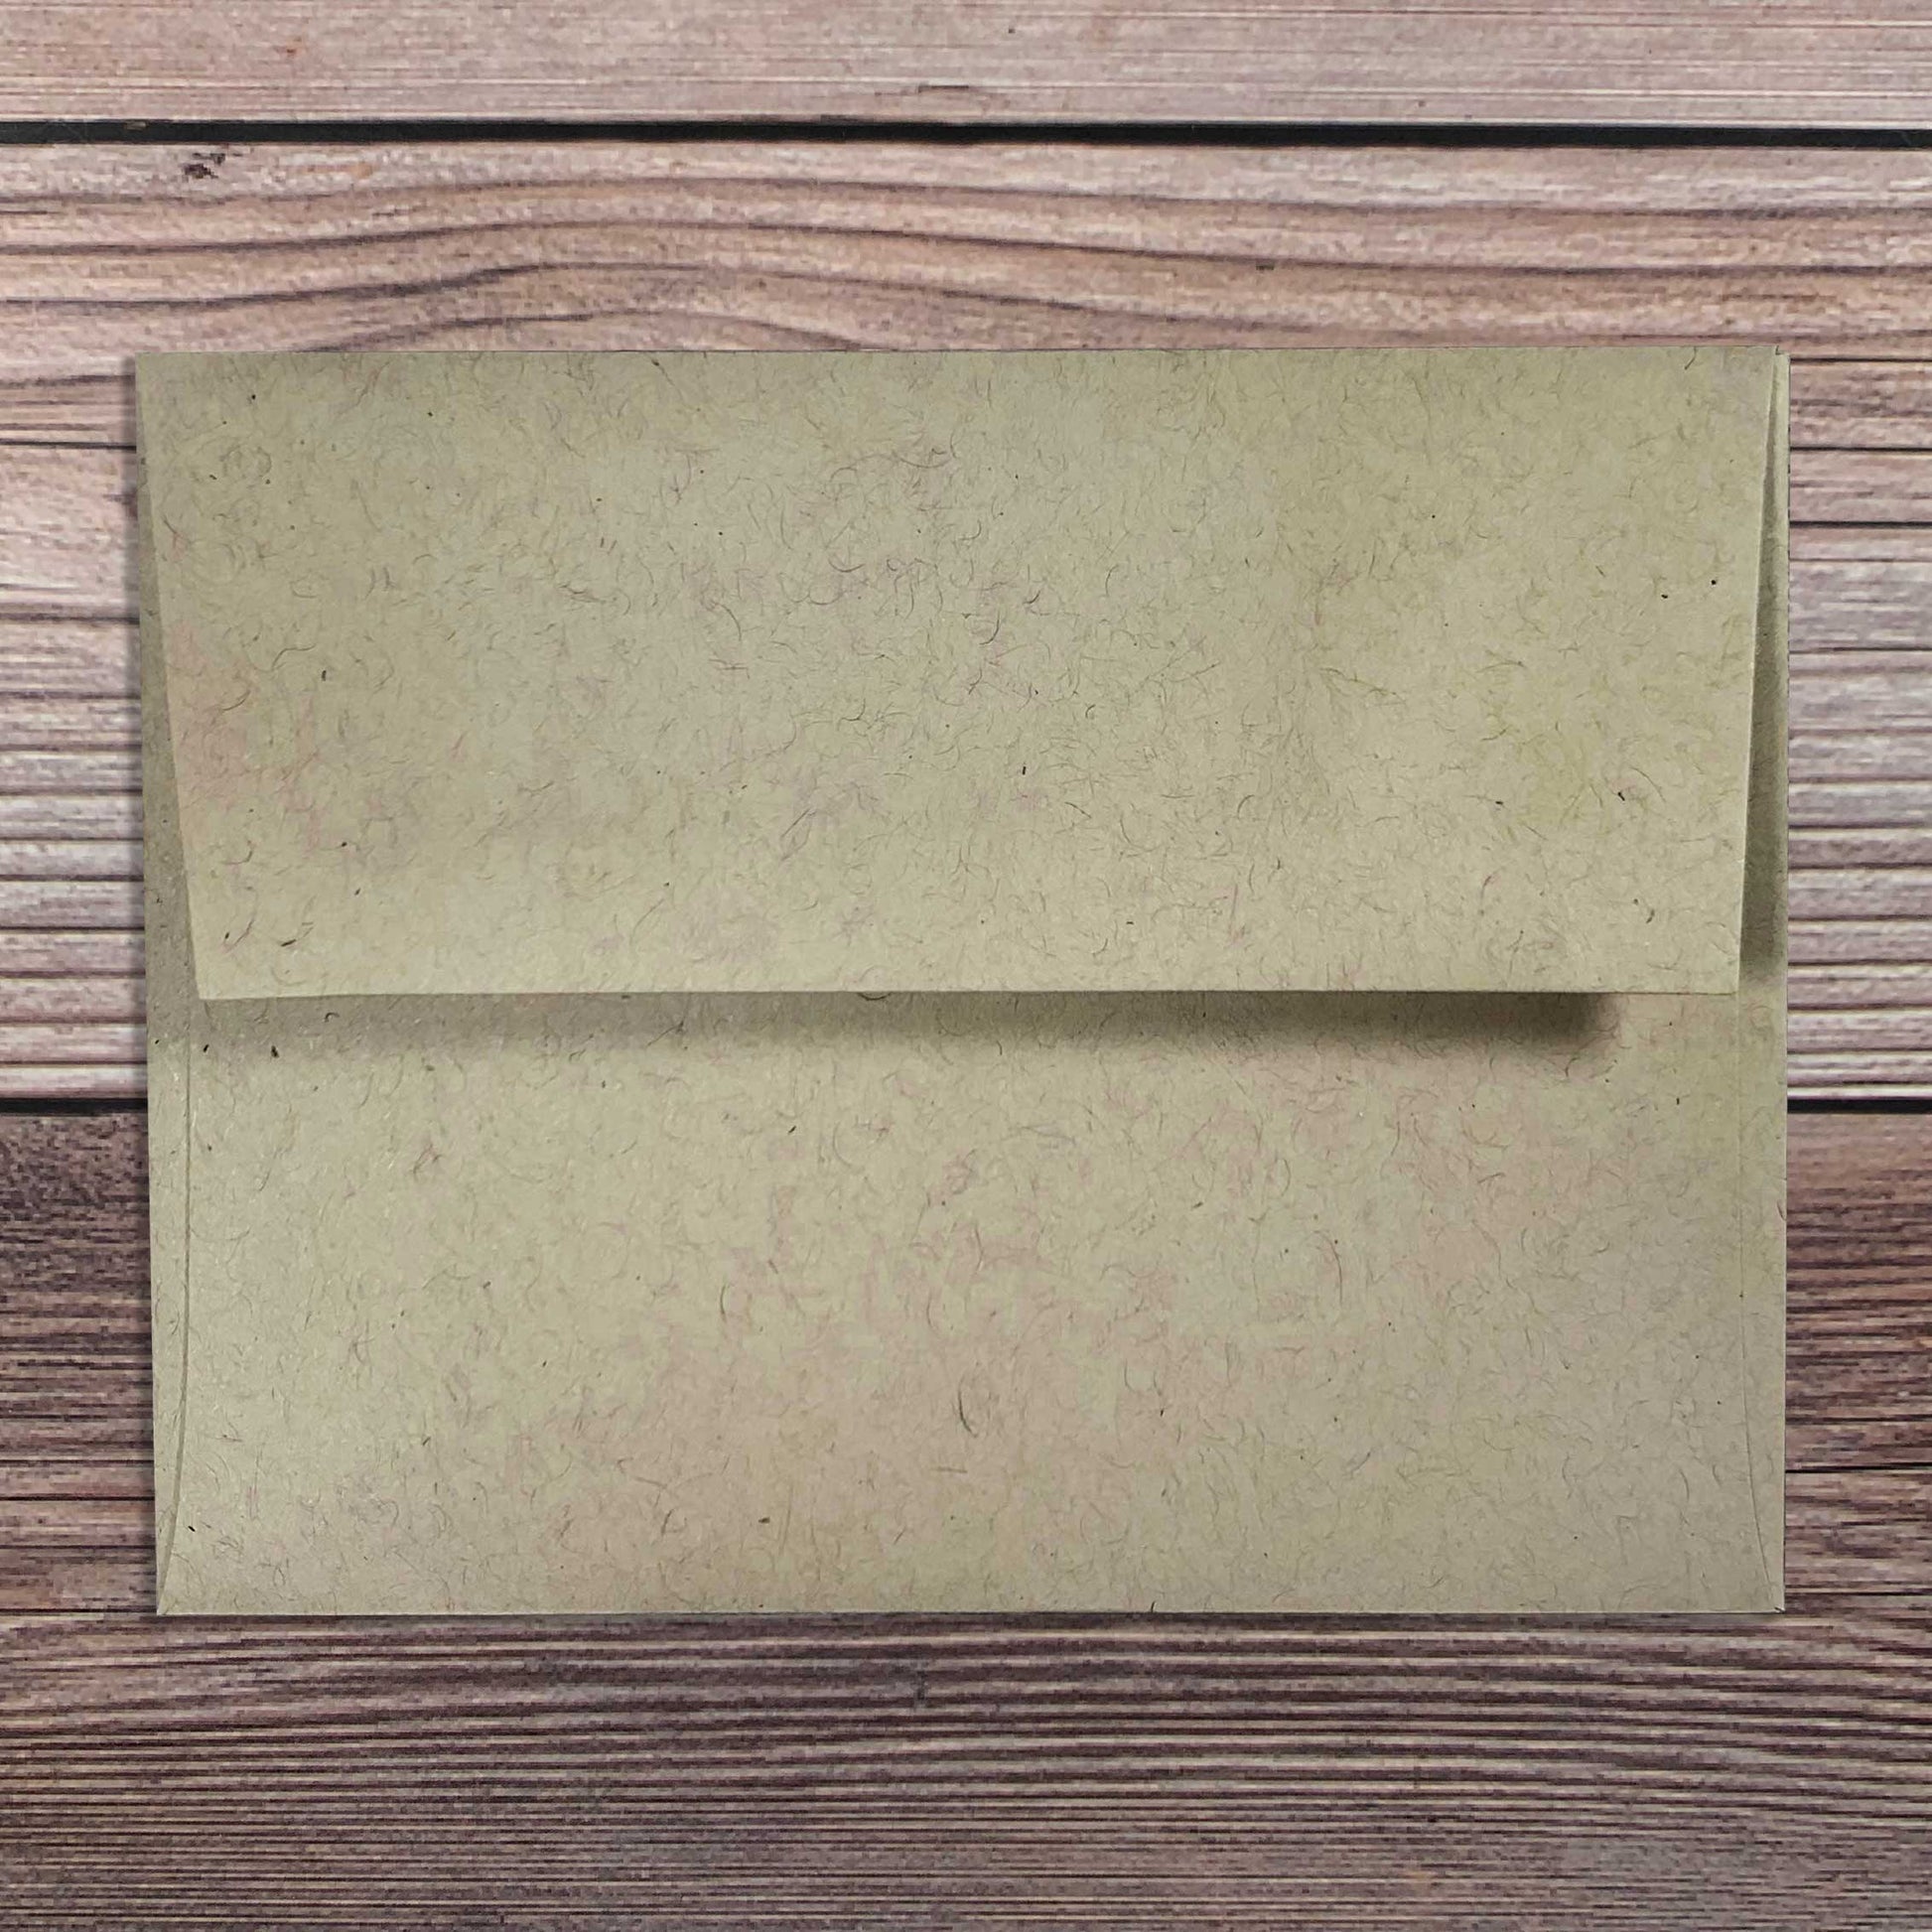 Greeting Card envelope, kraft color, square flap, included with letterpress Christmas card.